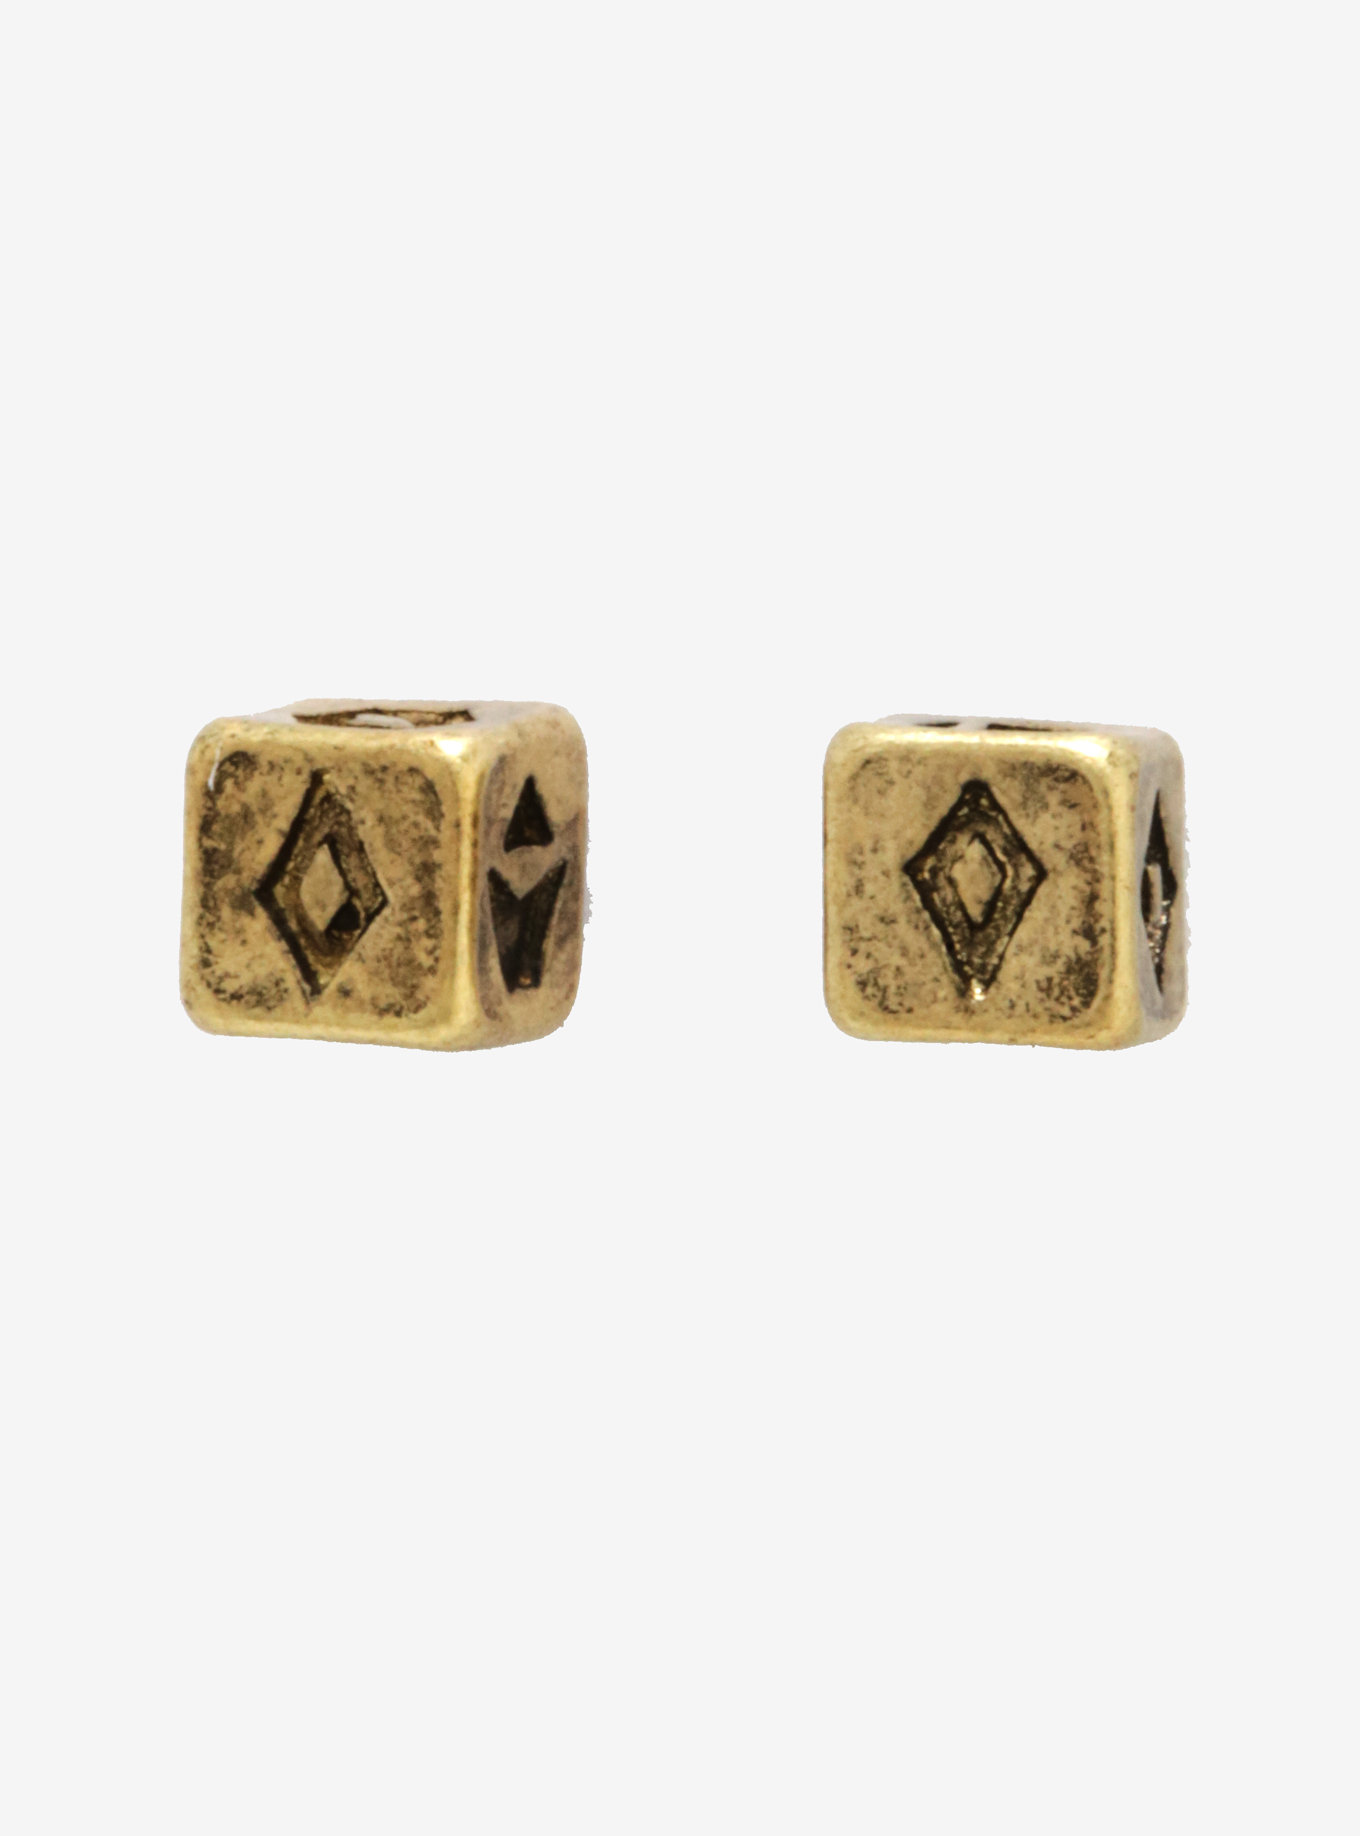 Star Wars Solo A Star Wars Story Dice Stud Earrings available exclusively at Box Lunch